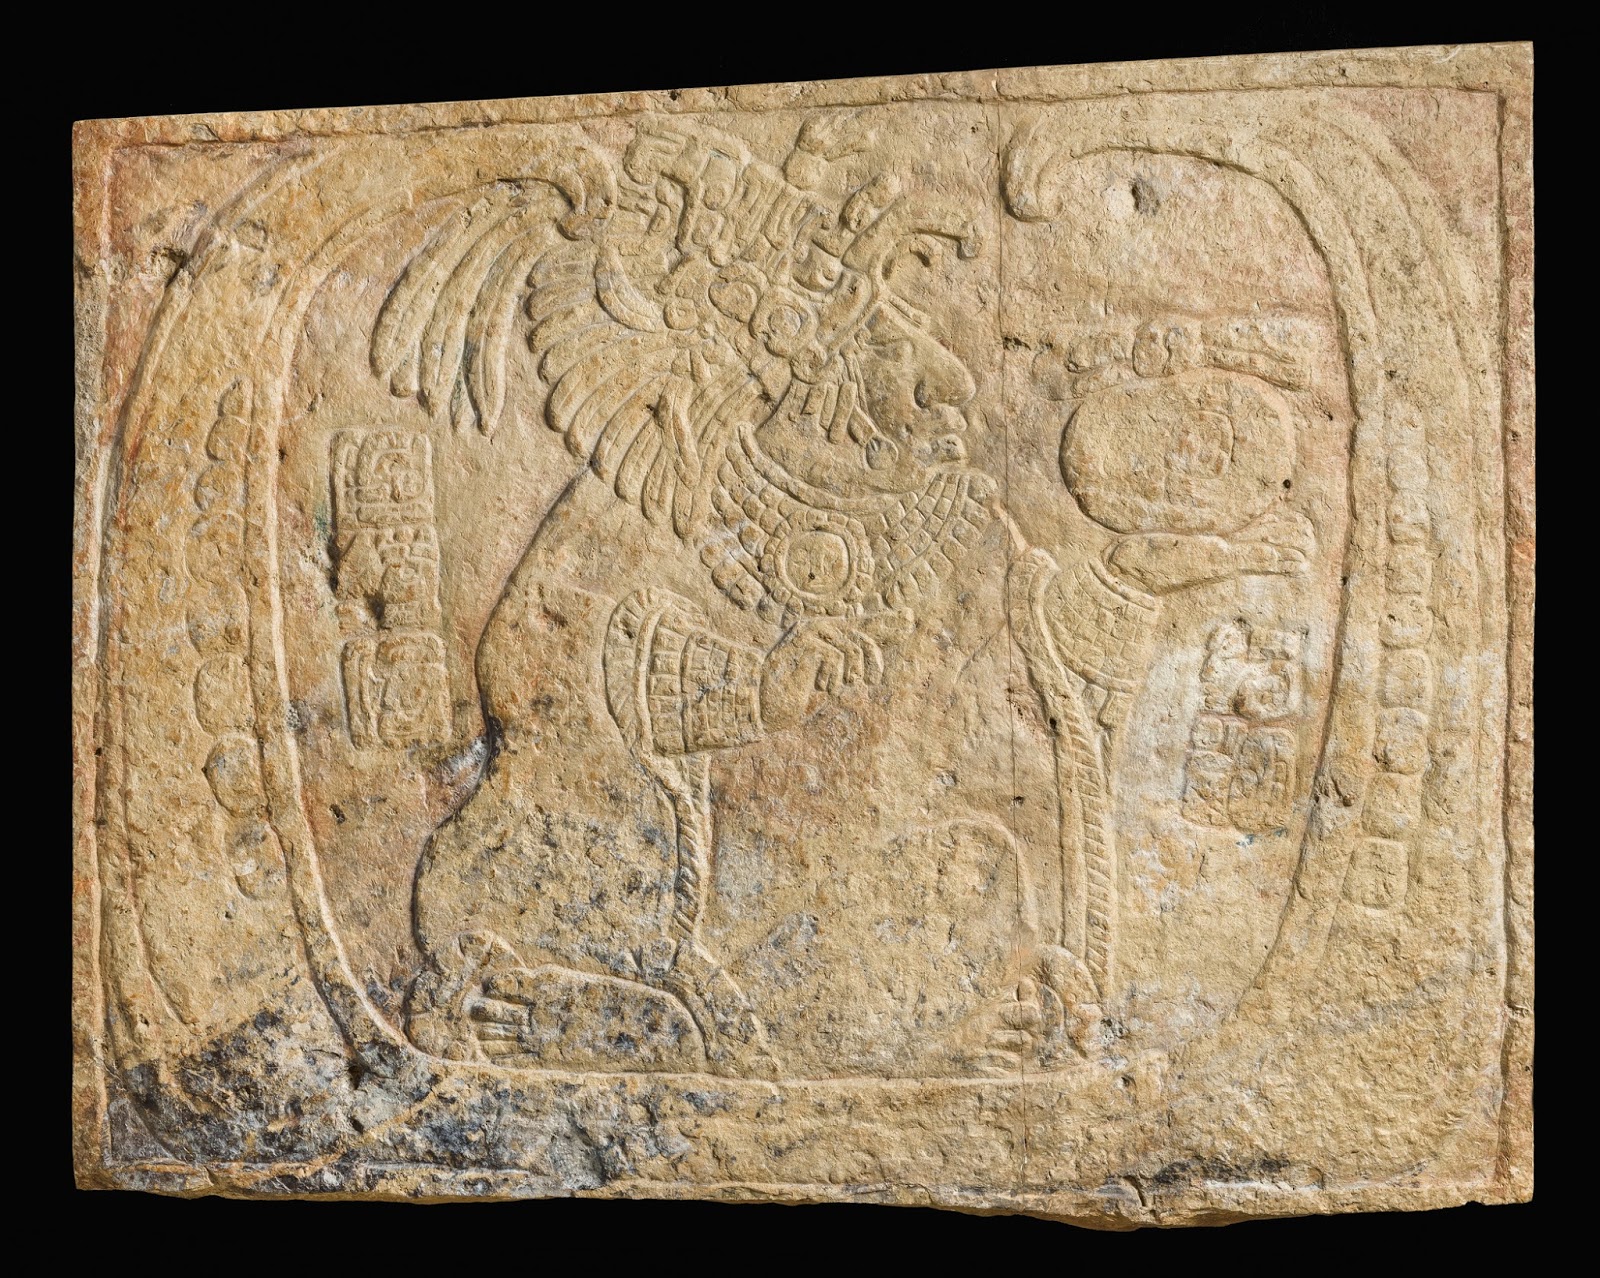 The Role of archaeoastronomy in the Maya World: the case study of